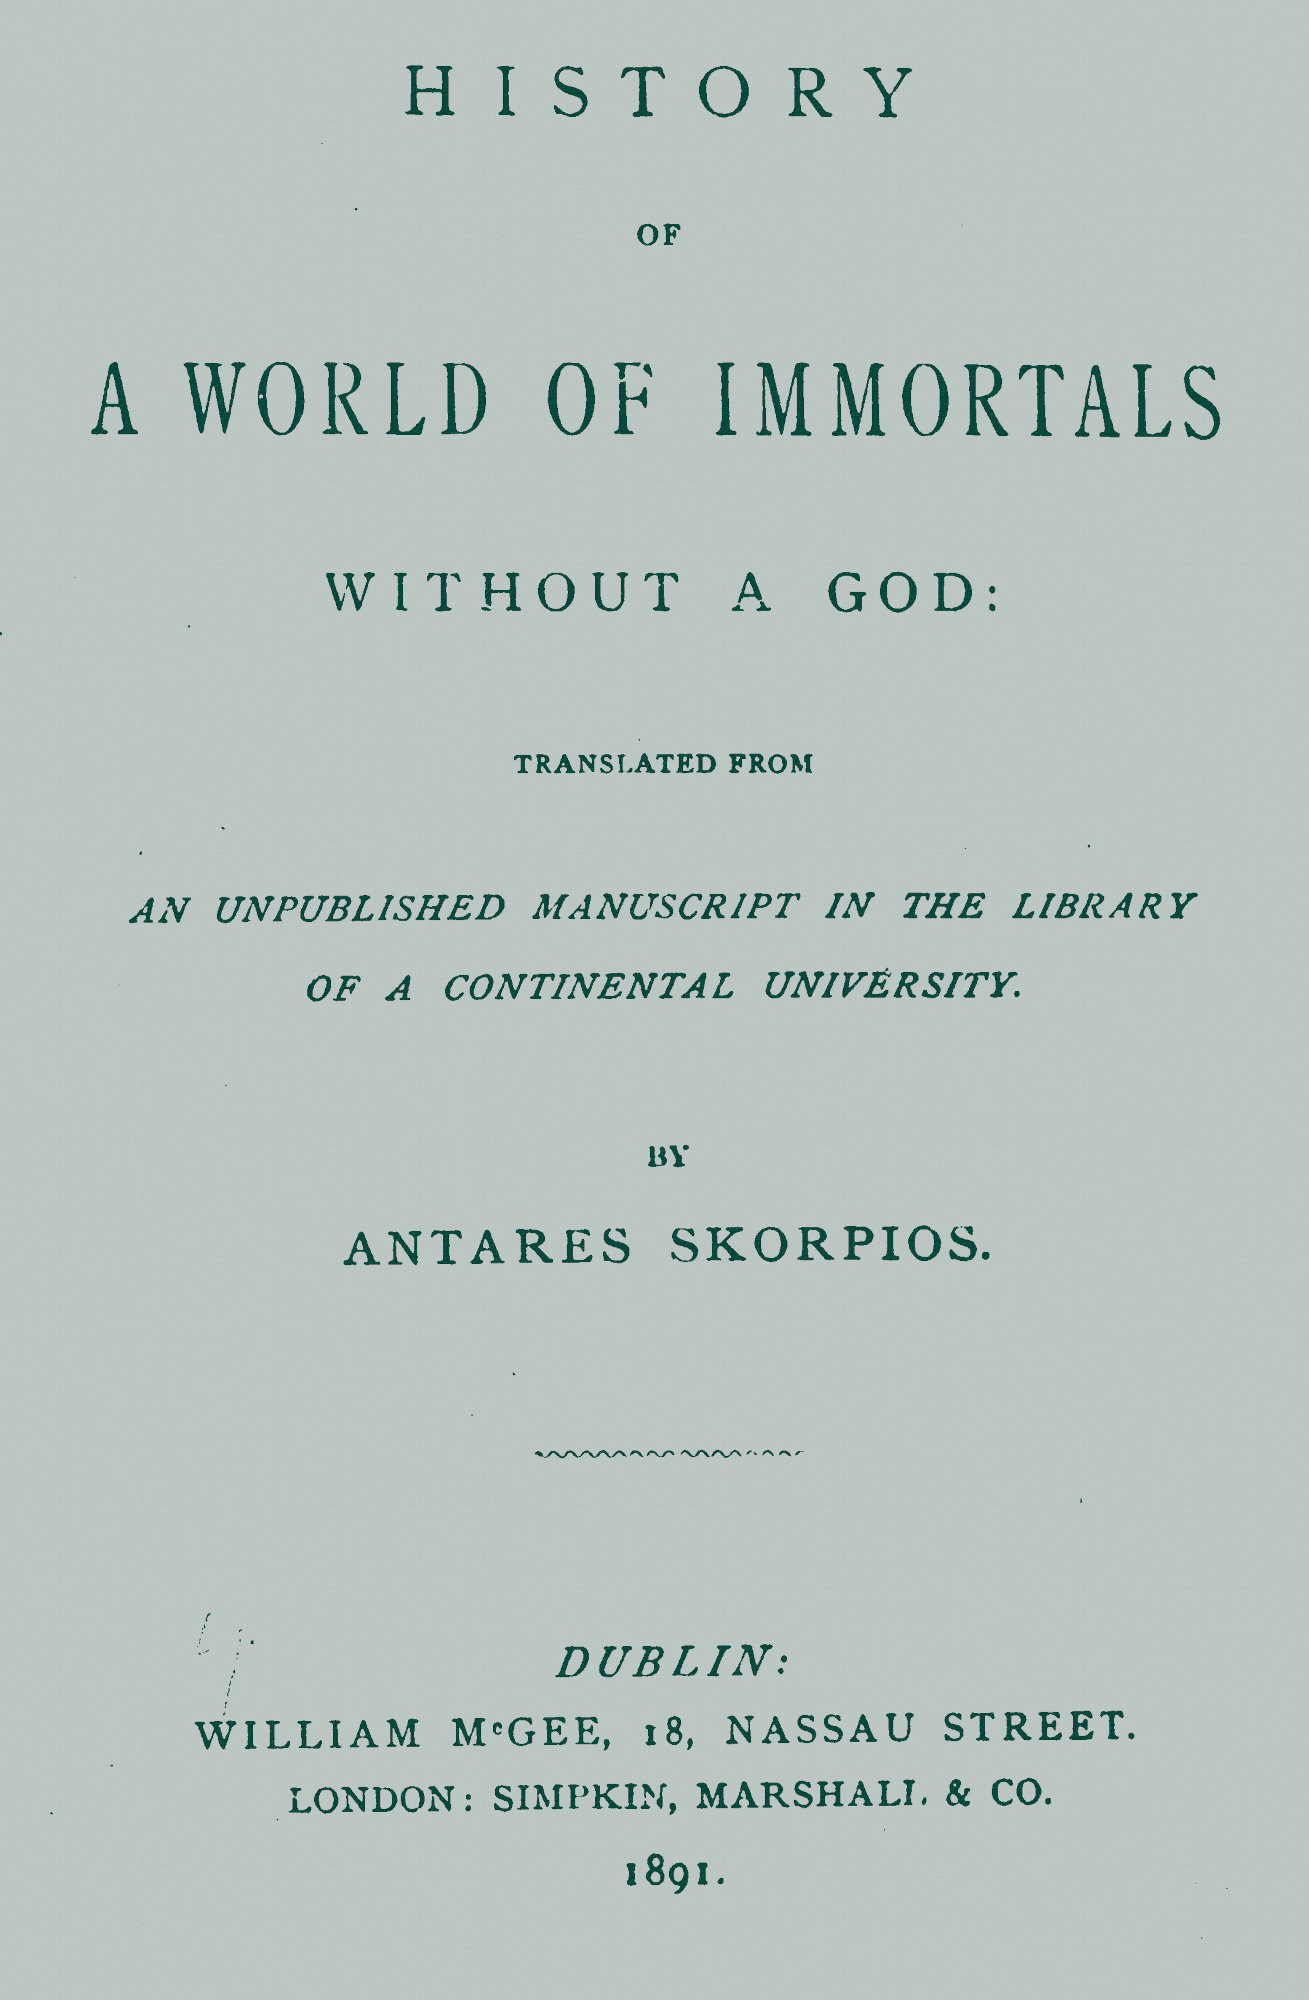 History of a World of Immortals without a God&#10;Translated from an unpublished manuscript in the library of a continental university